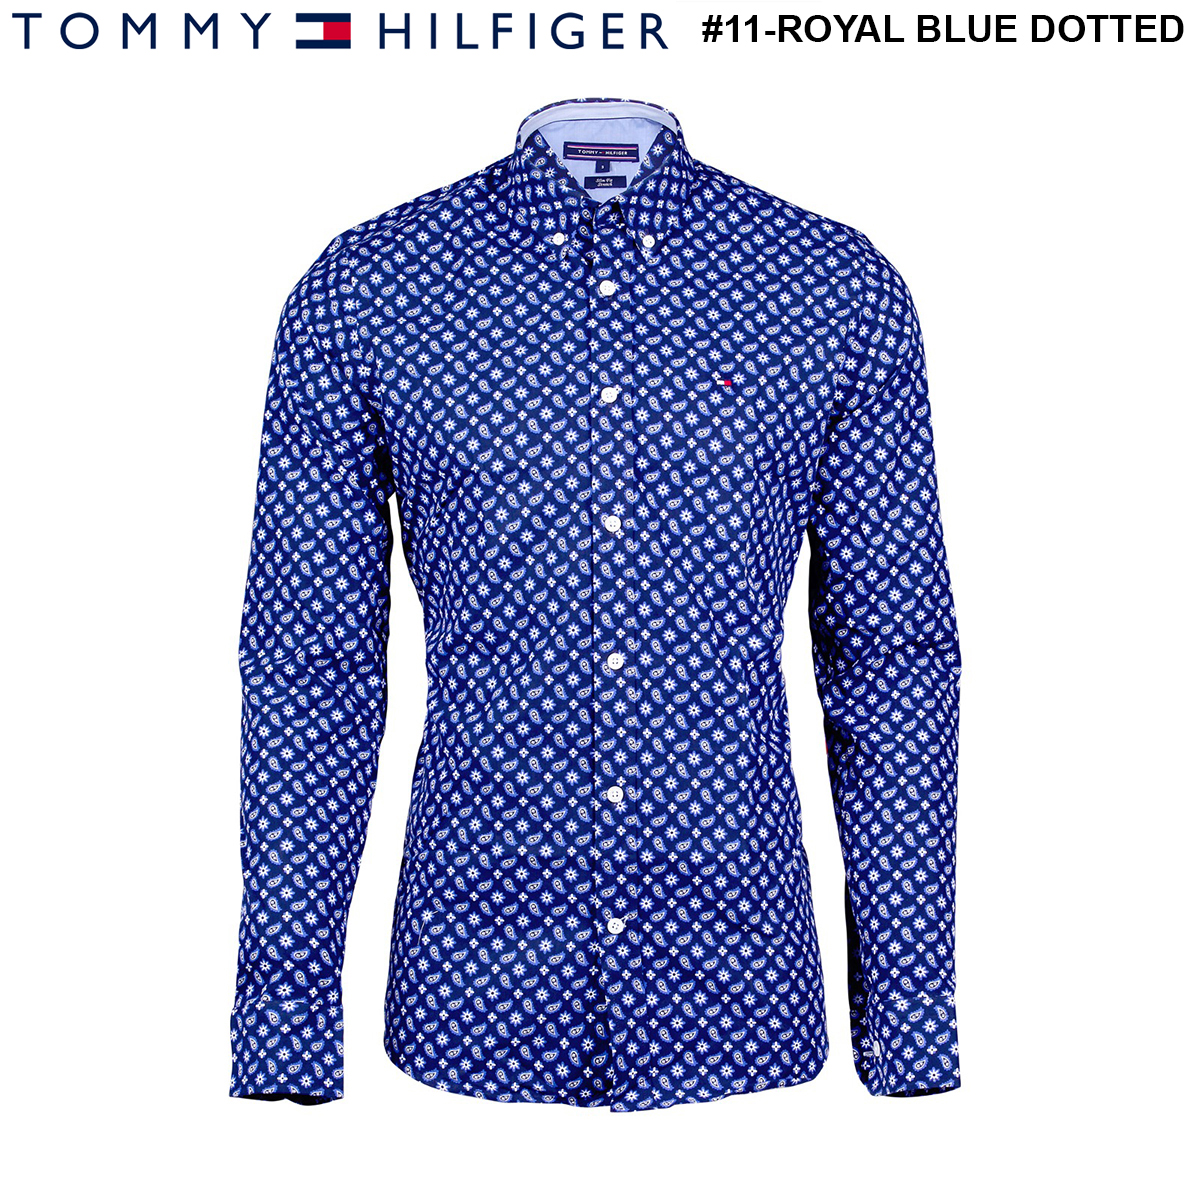 Royal-Blue-Dotted